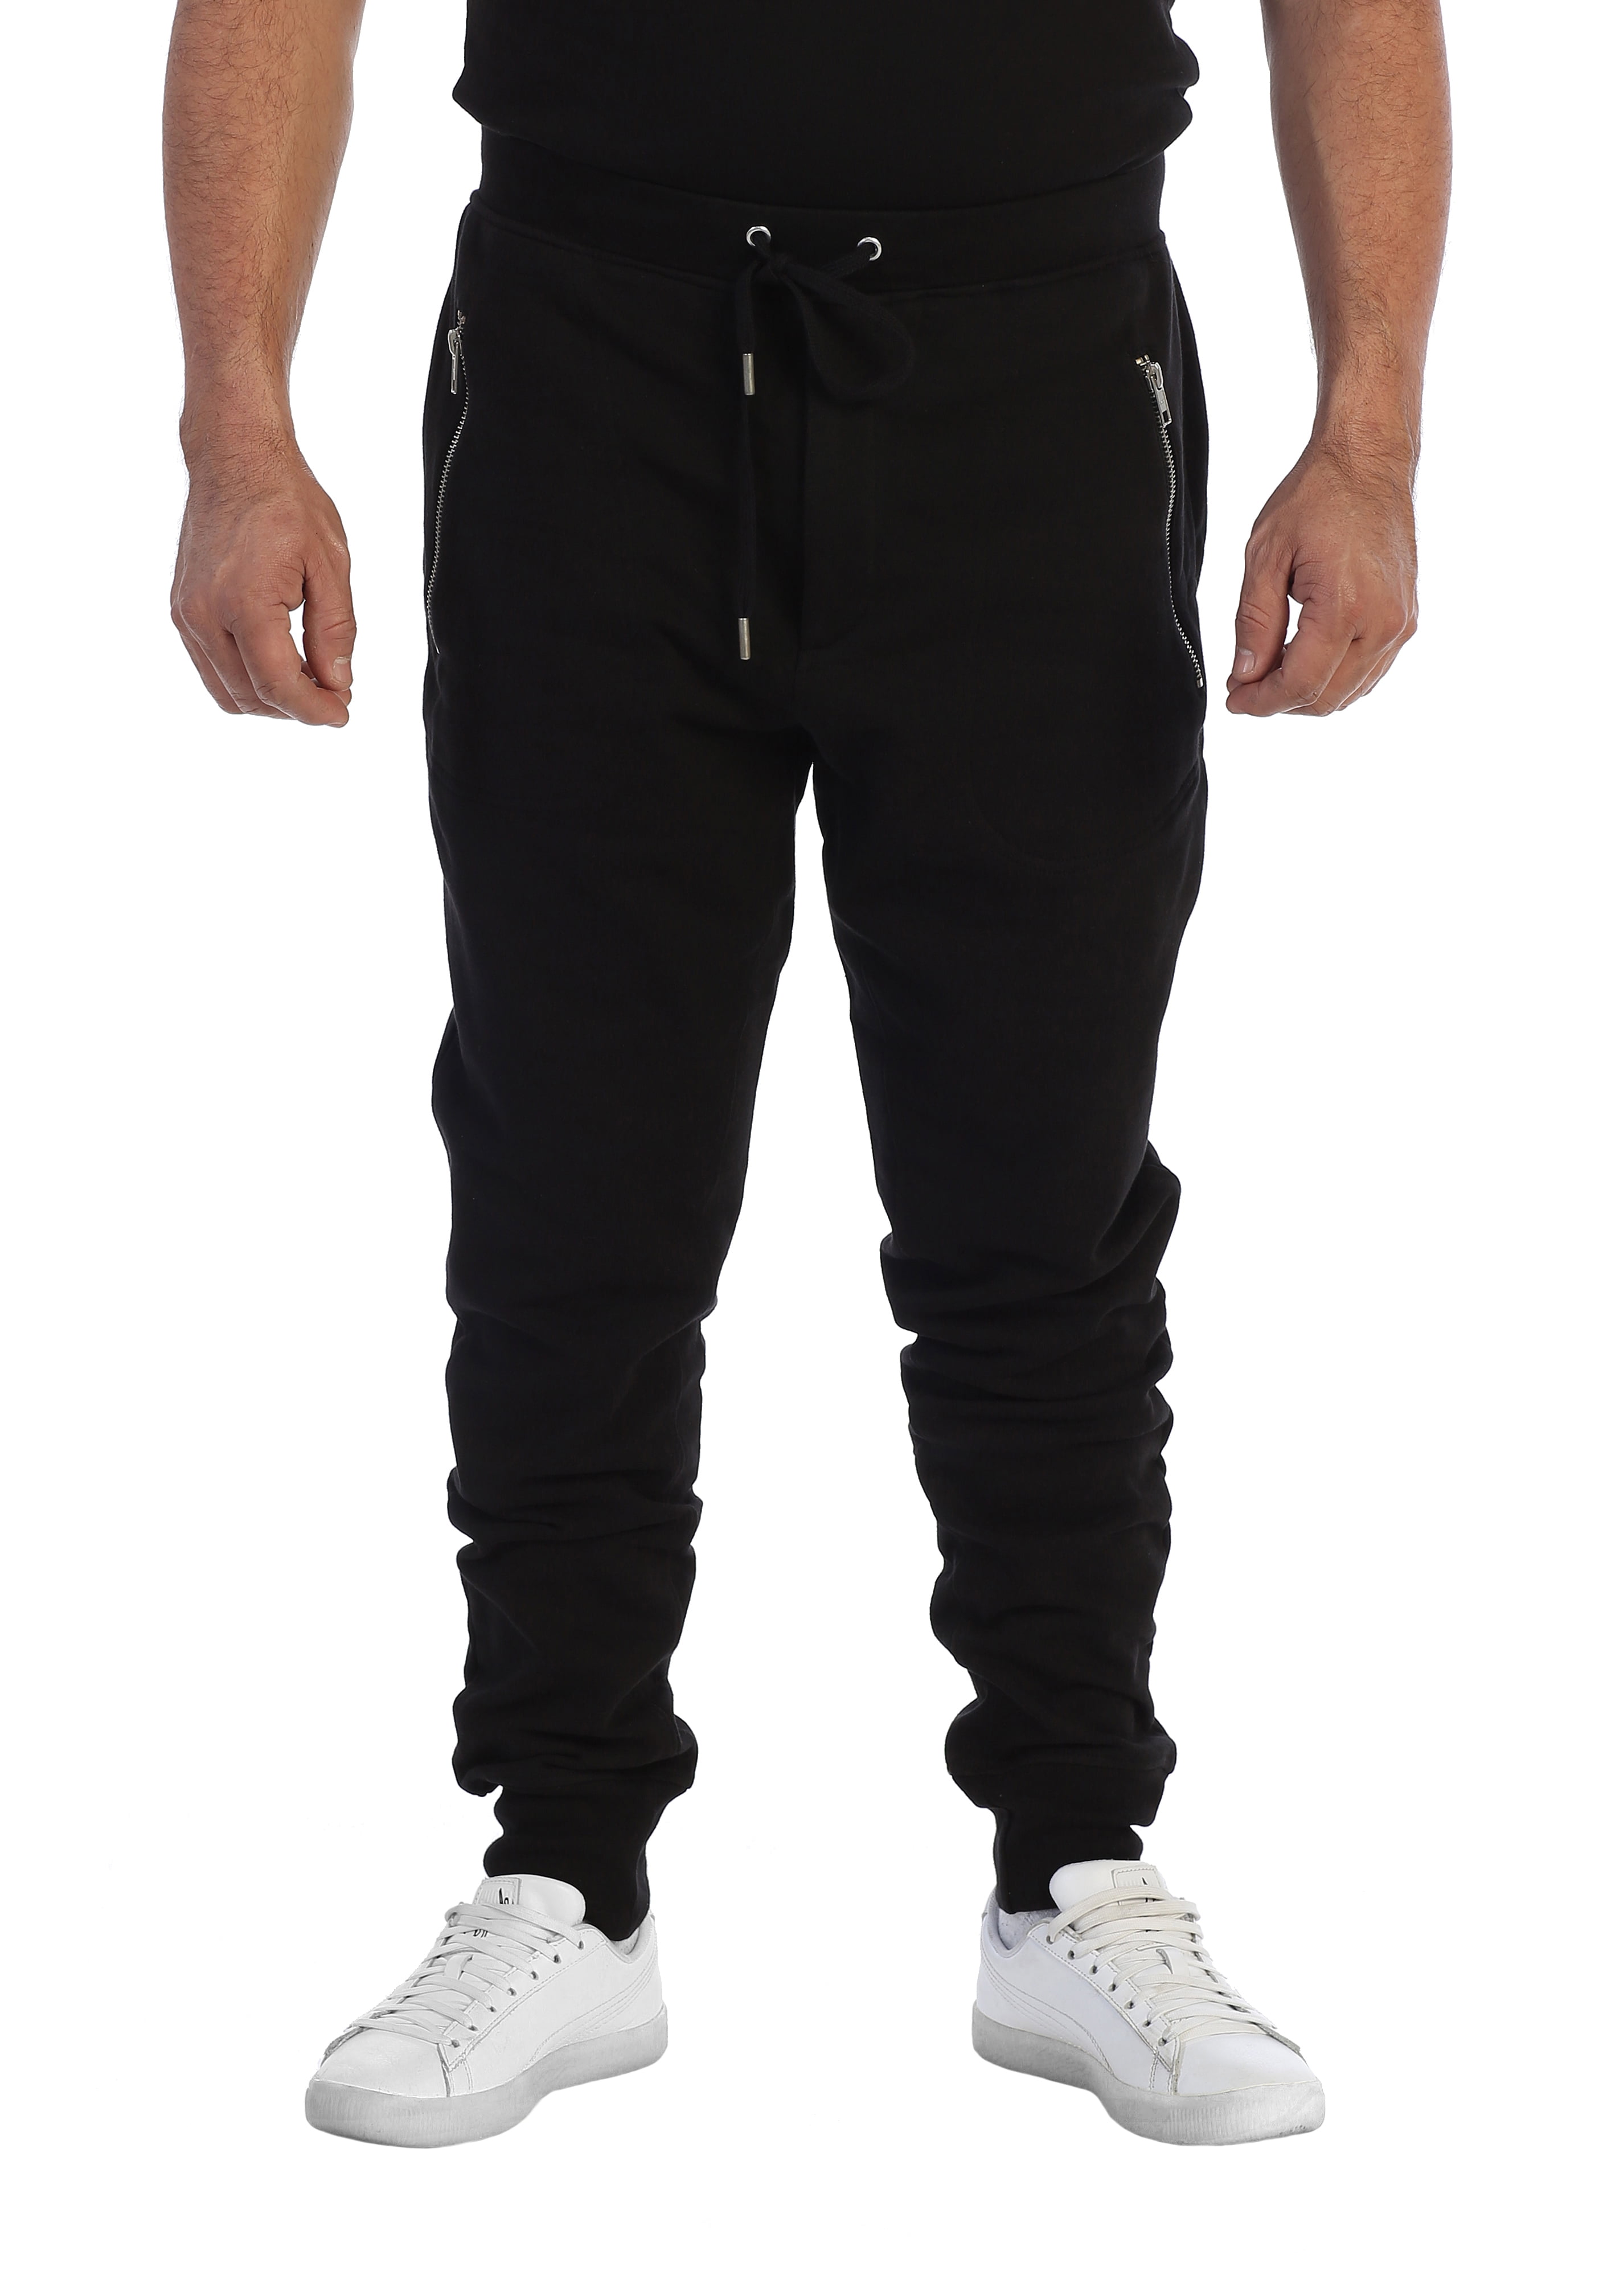 Marled Fleece Sweatpants with Draw String and Pockets for Men